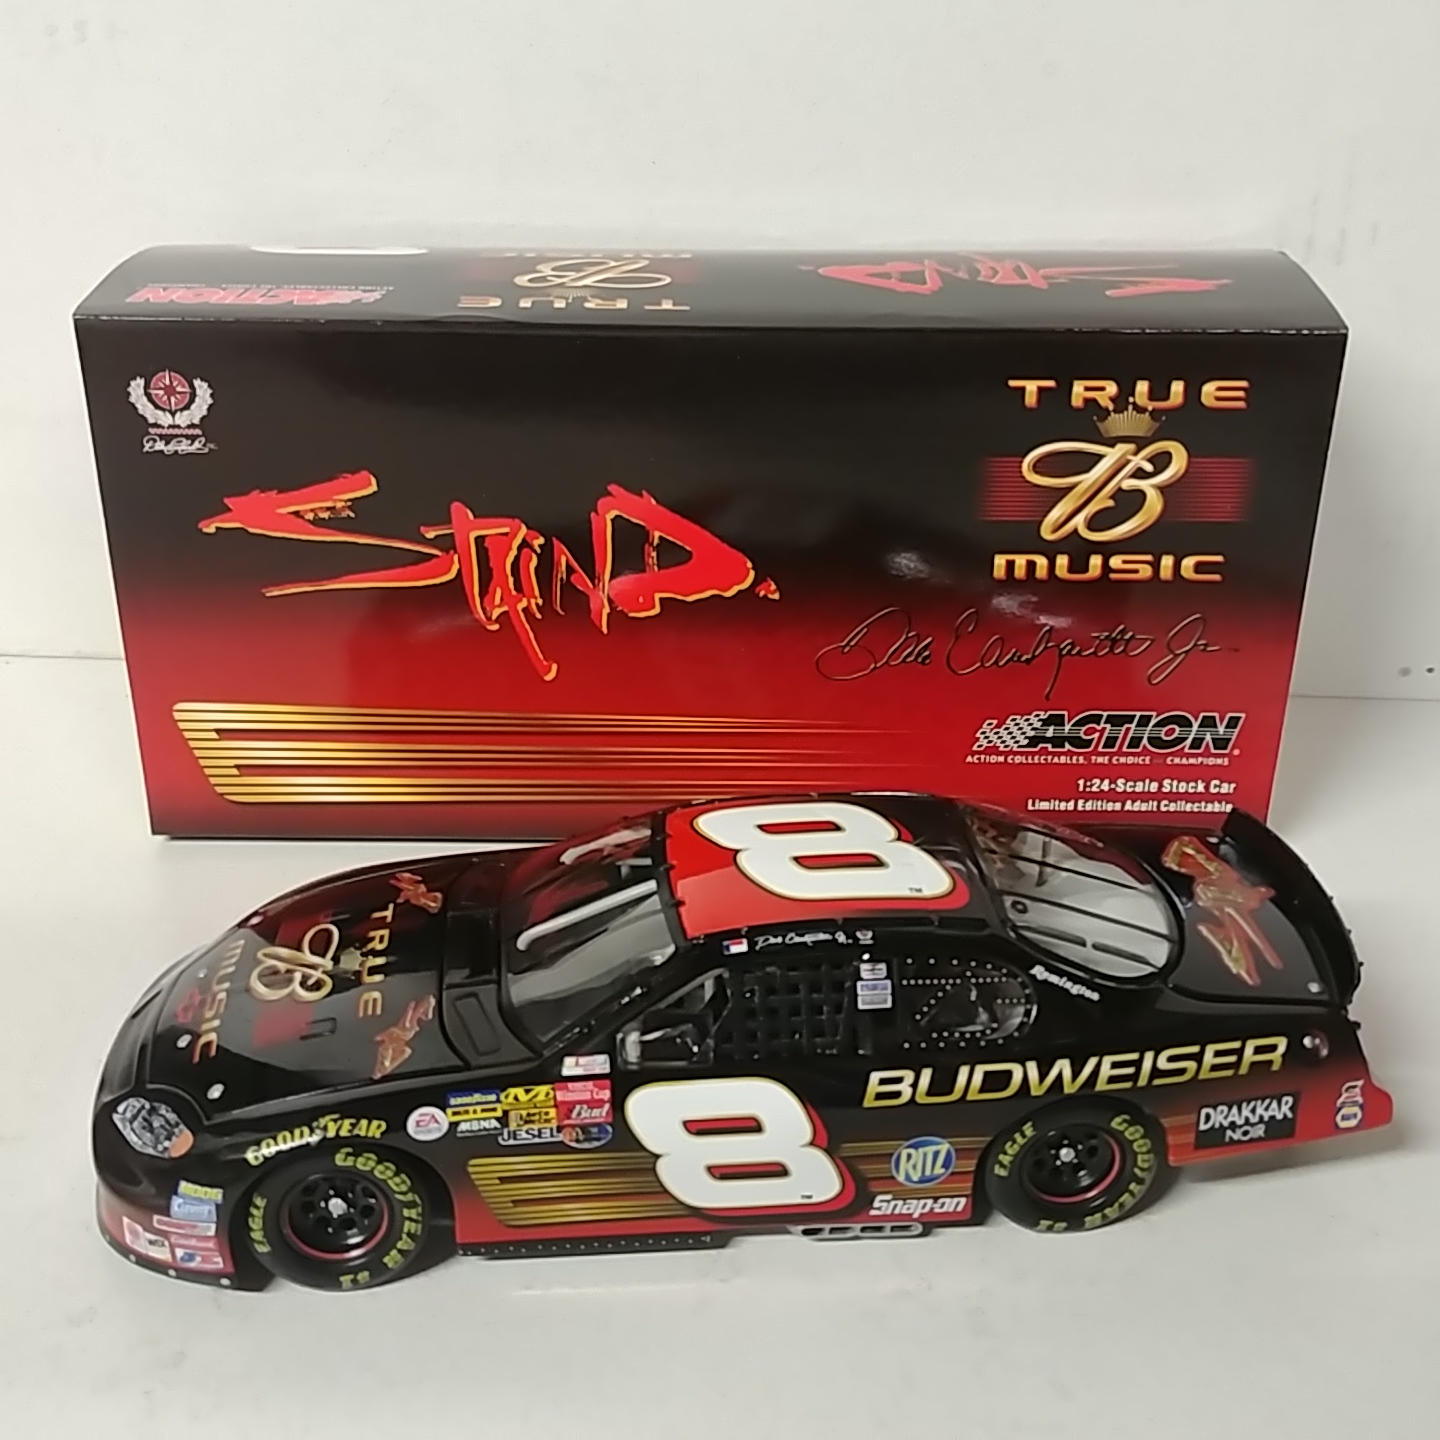 2003 Dale Earnhardt Jr 1/24 Budweiser "Chevy Rock and Roll" "Staind" c/w car